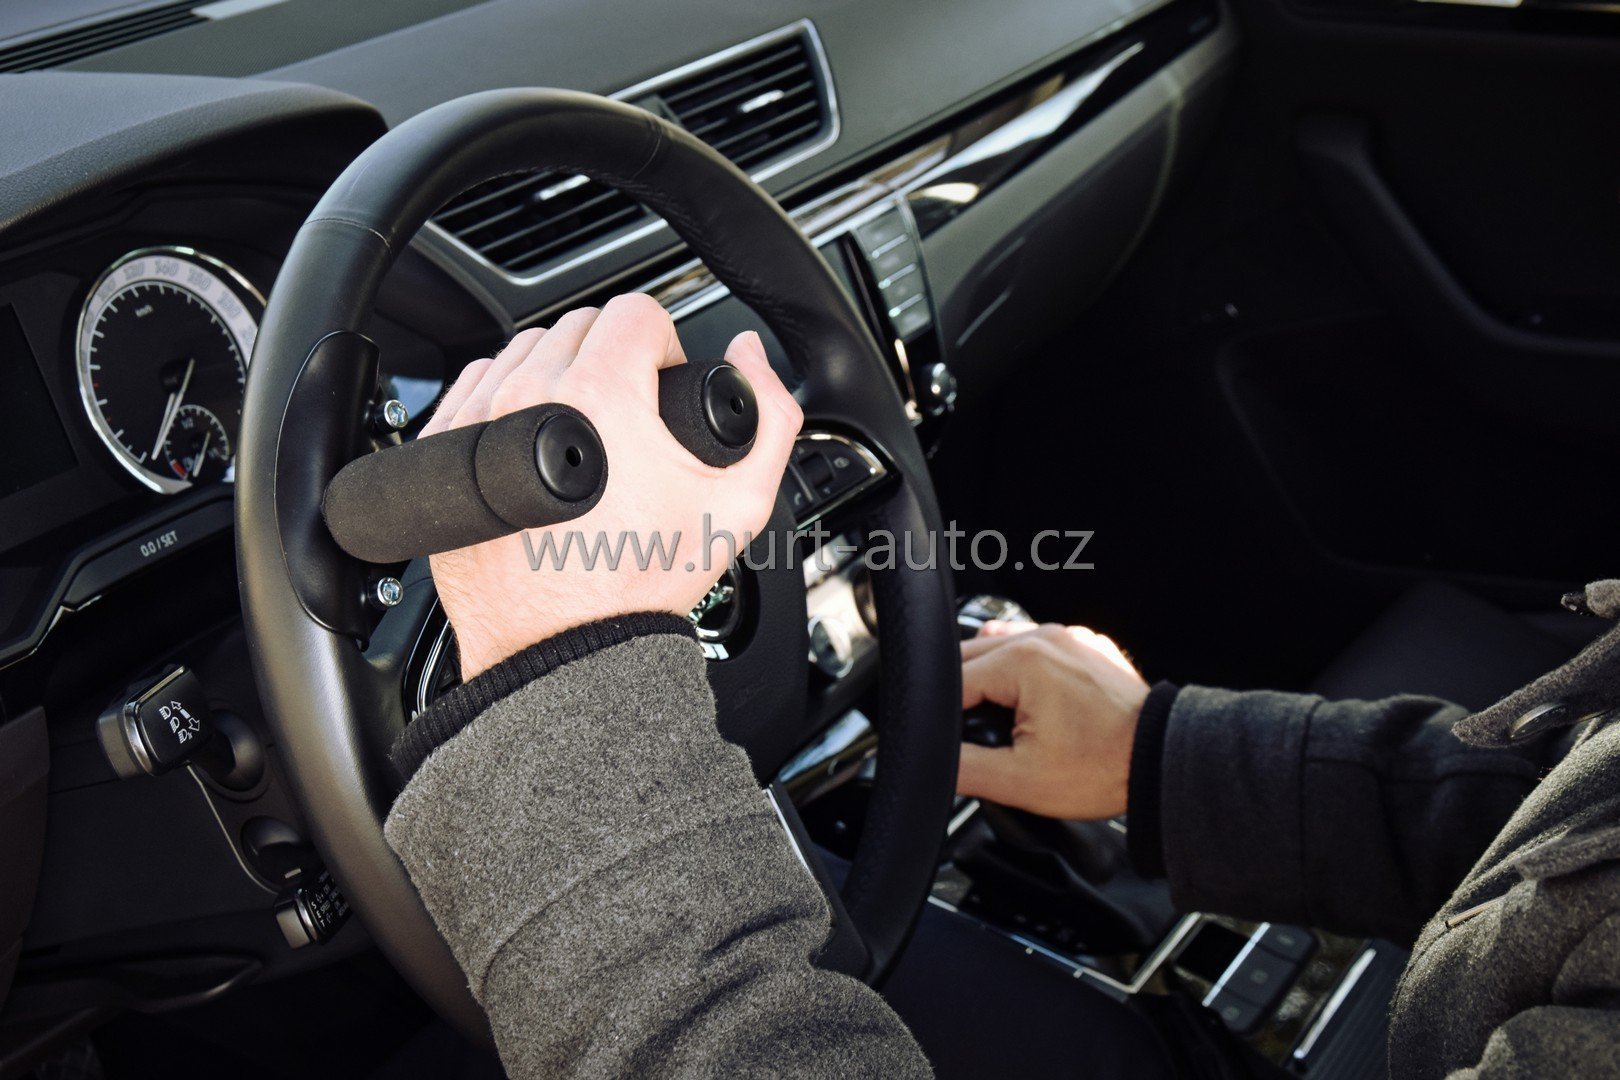 steering wheels acessories for one hand driver